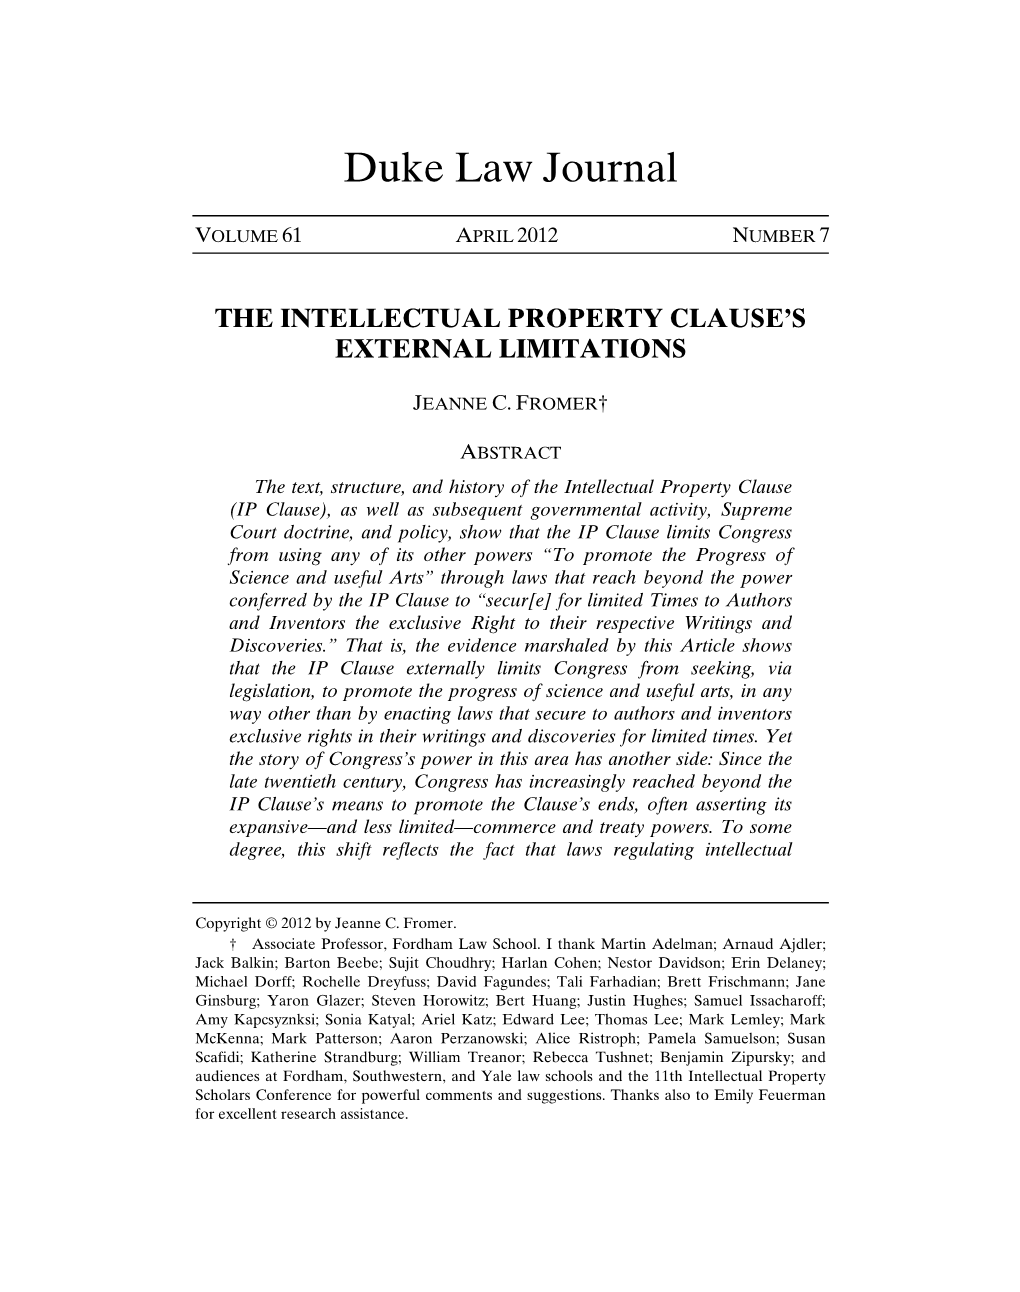 The Intellectual Property Clause's External Limitations